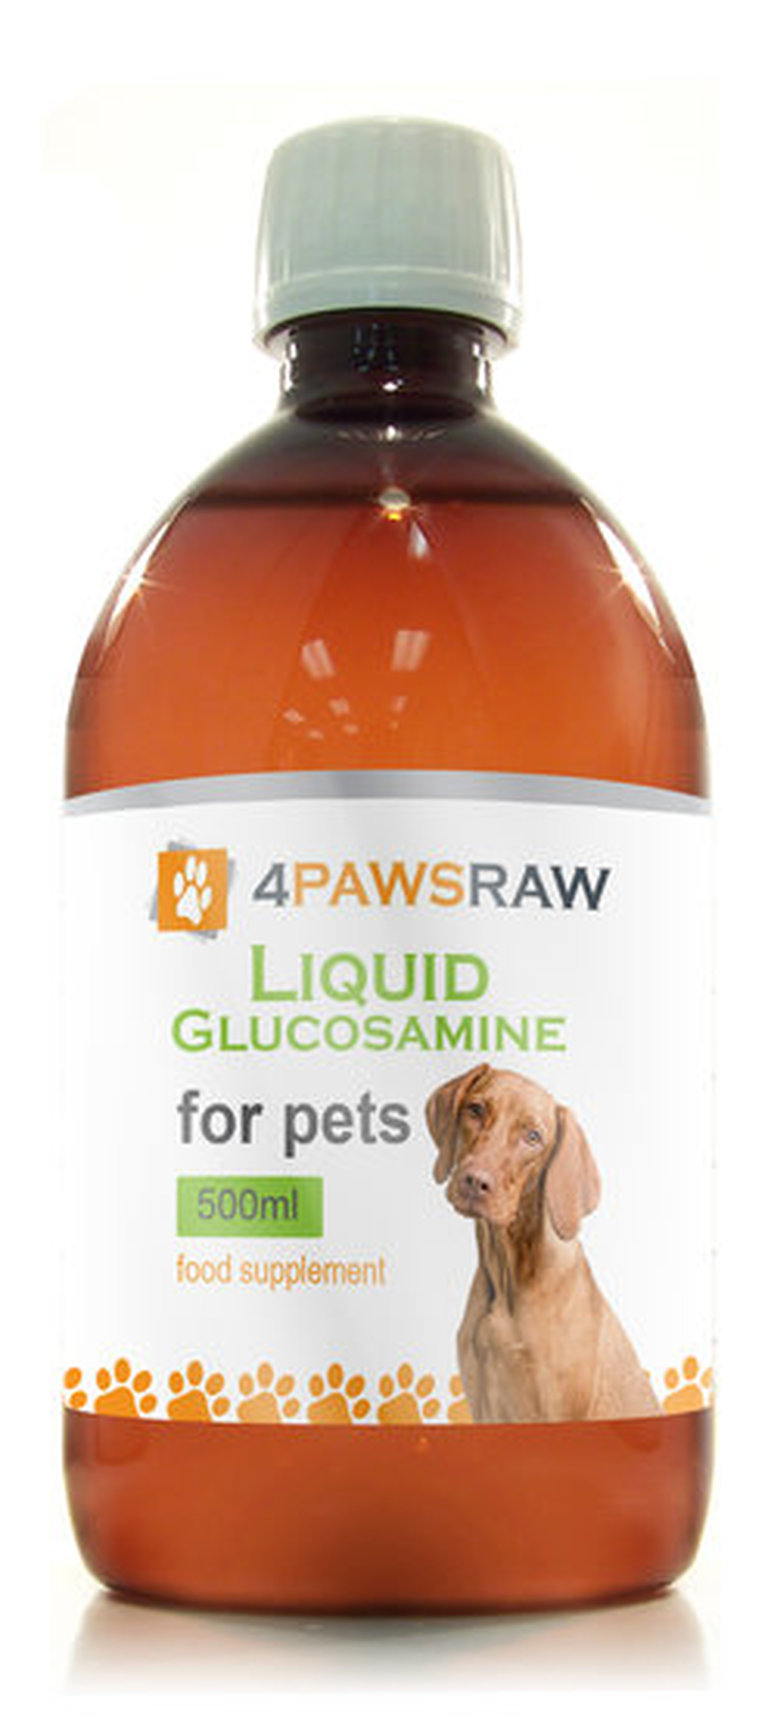 Liquid Glucosamine for Dogs and Cats with Arthritis Joint Pain. LARGE Bottle 500ml